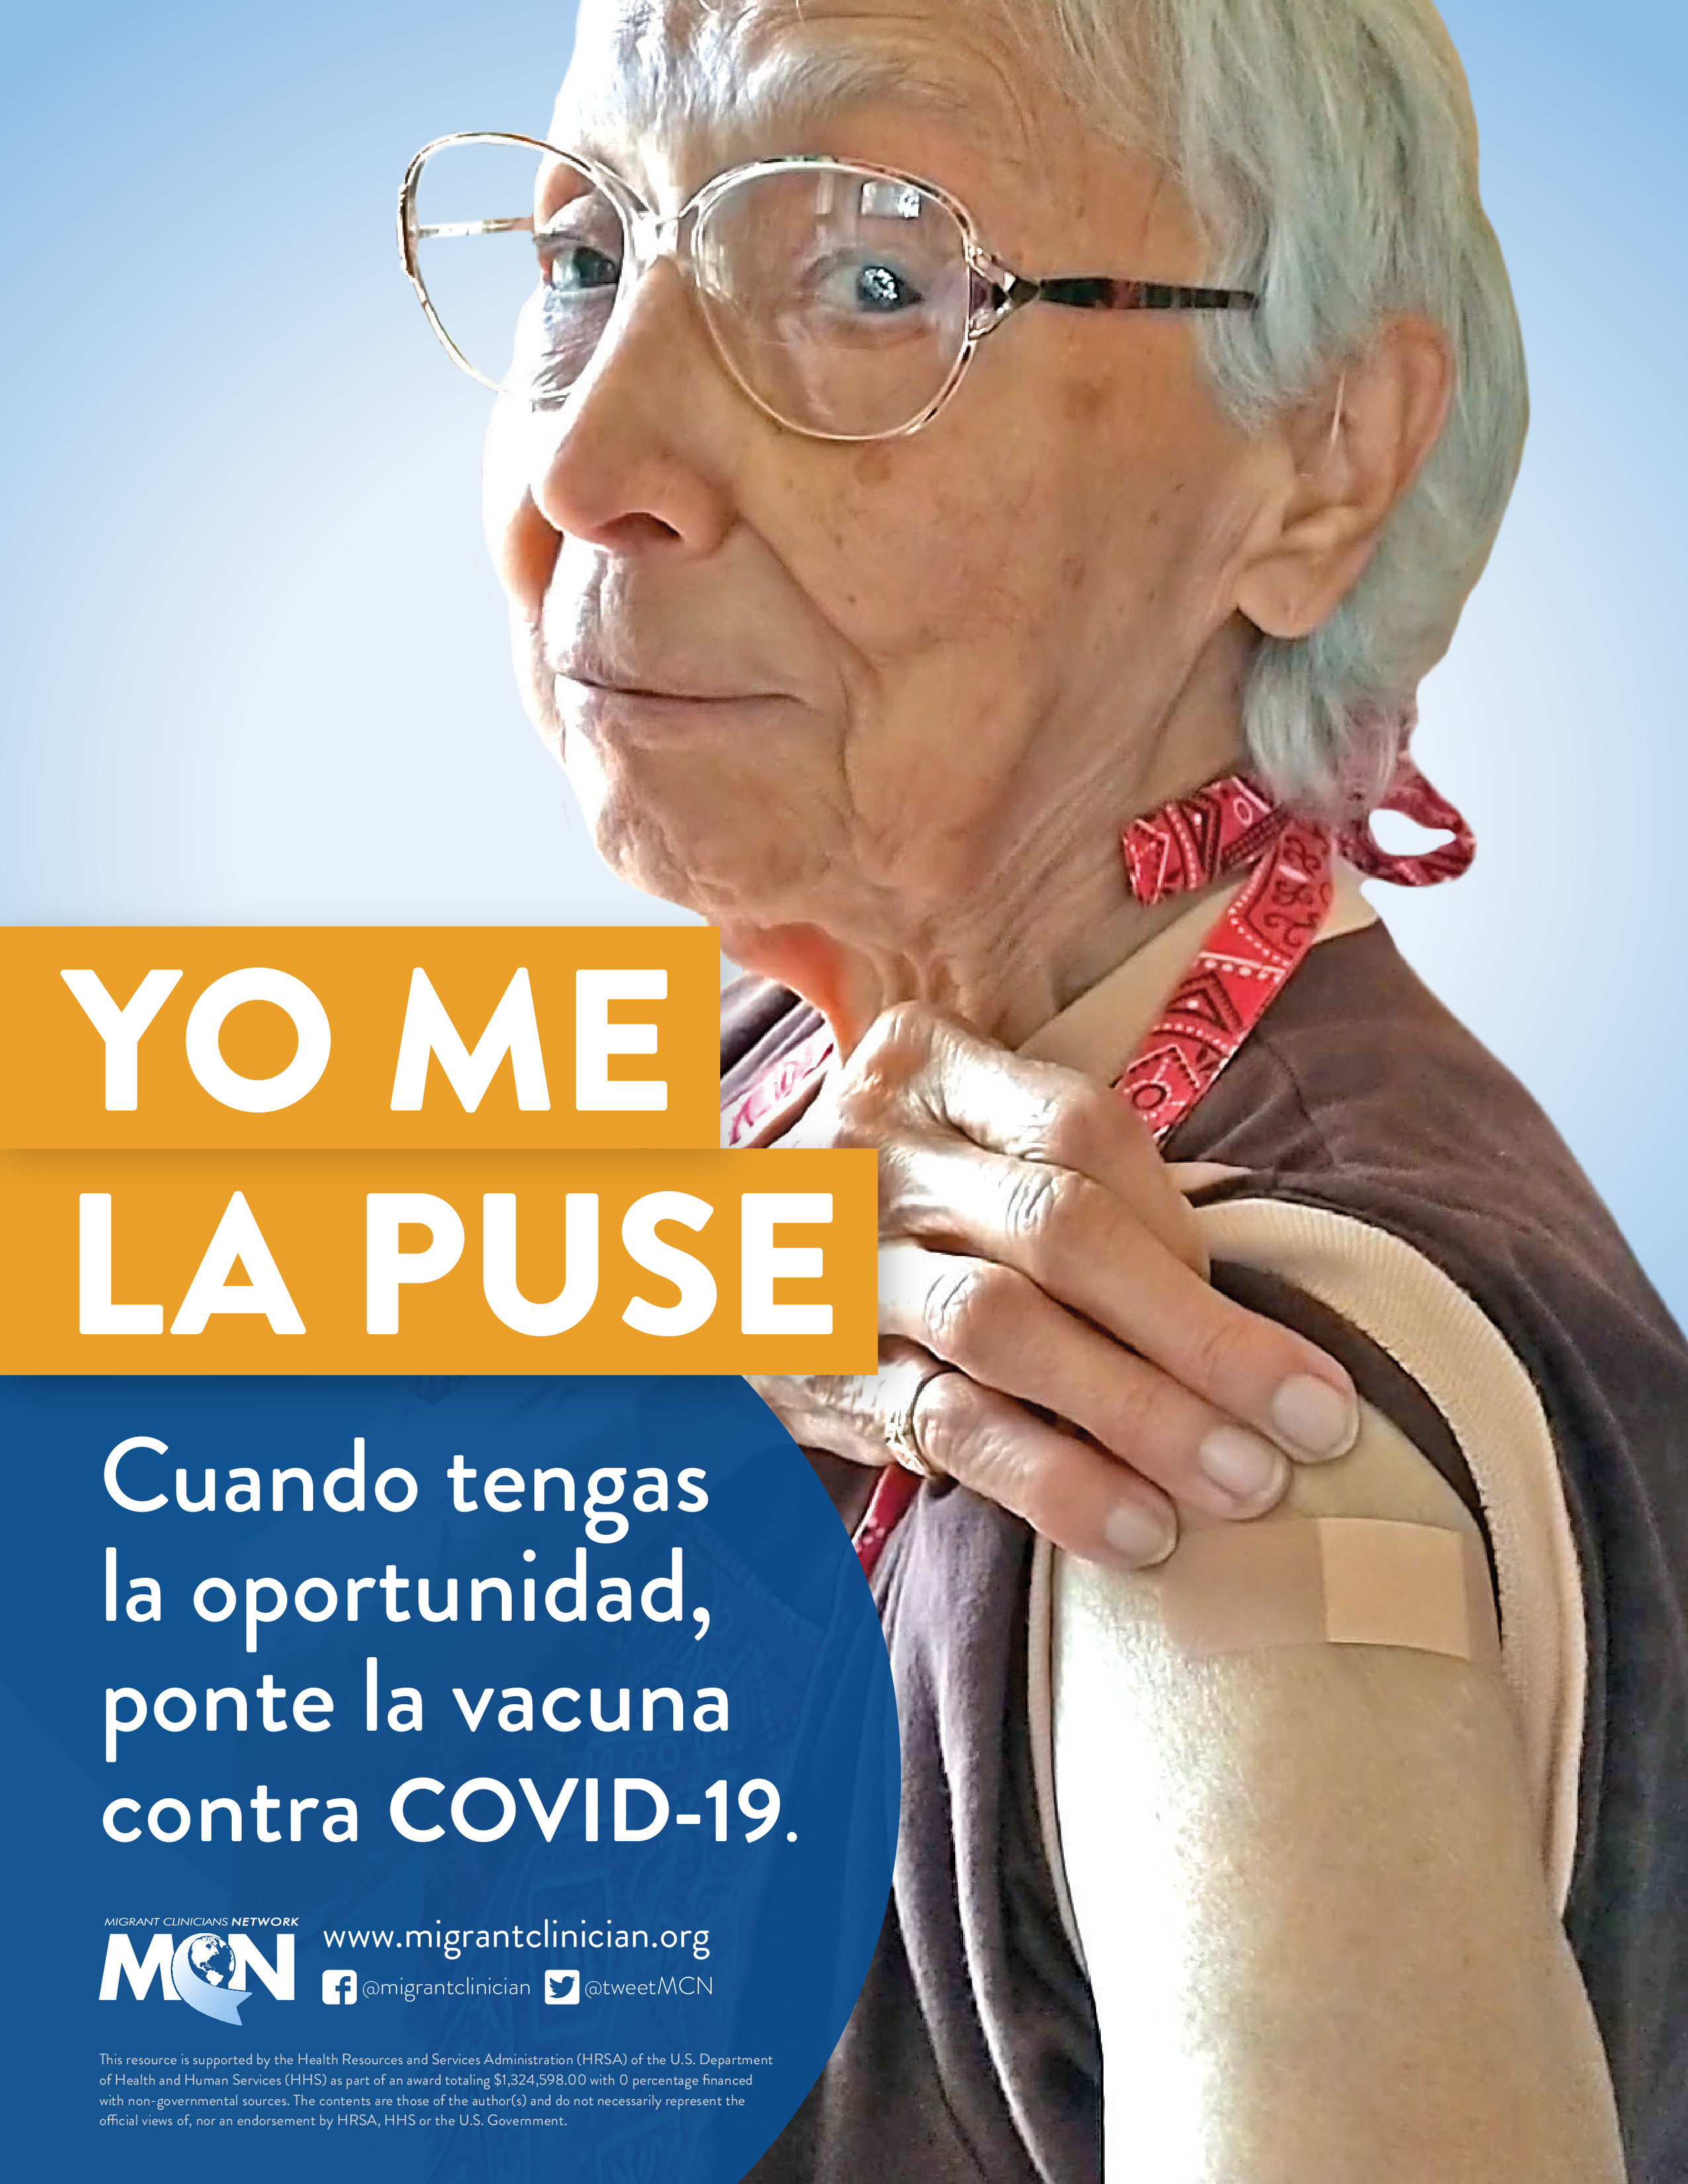 Older woman with glasses proudly shows off her vaccination.